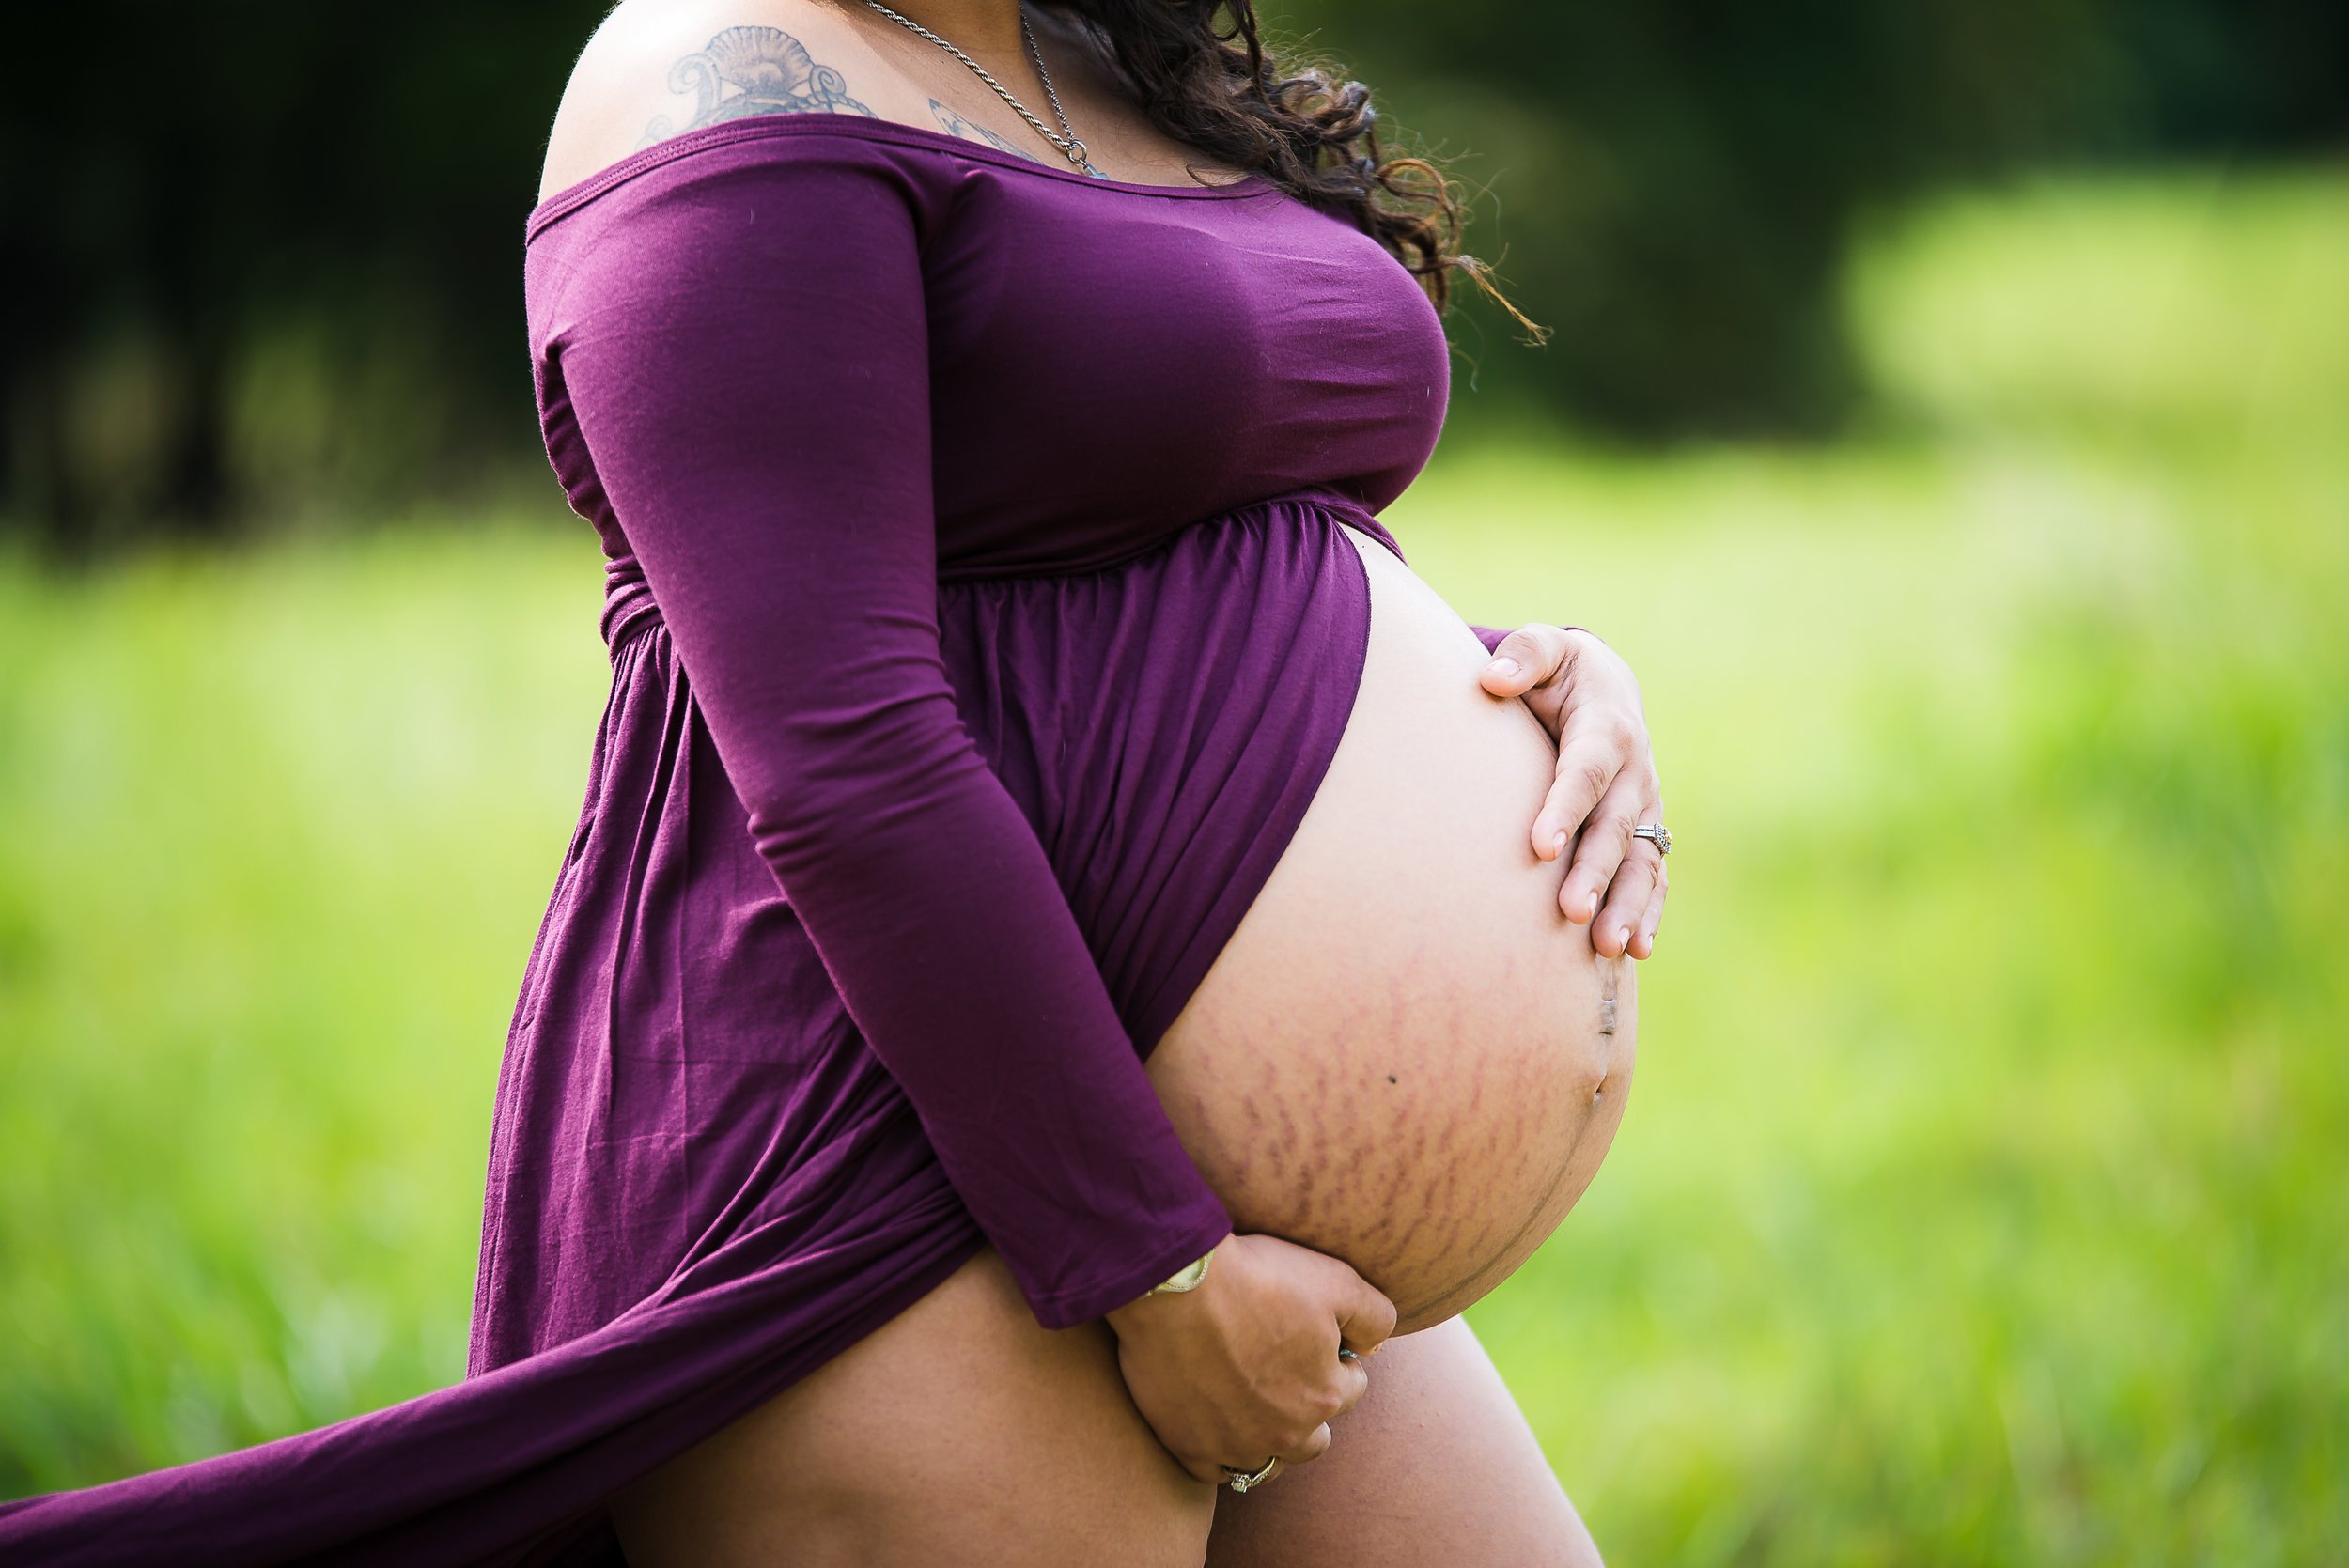 Maternity photographer in MD